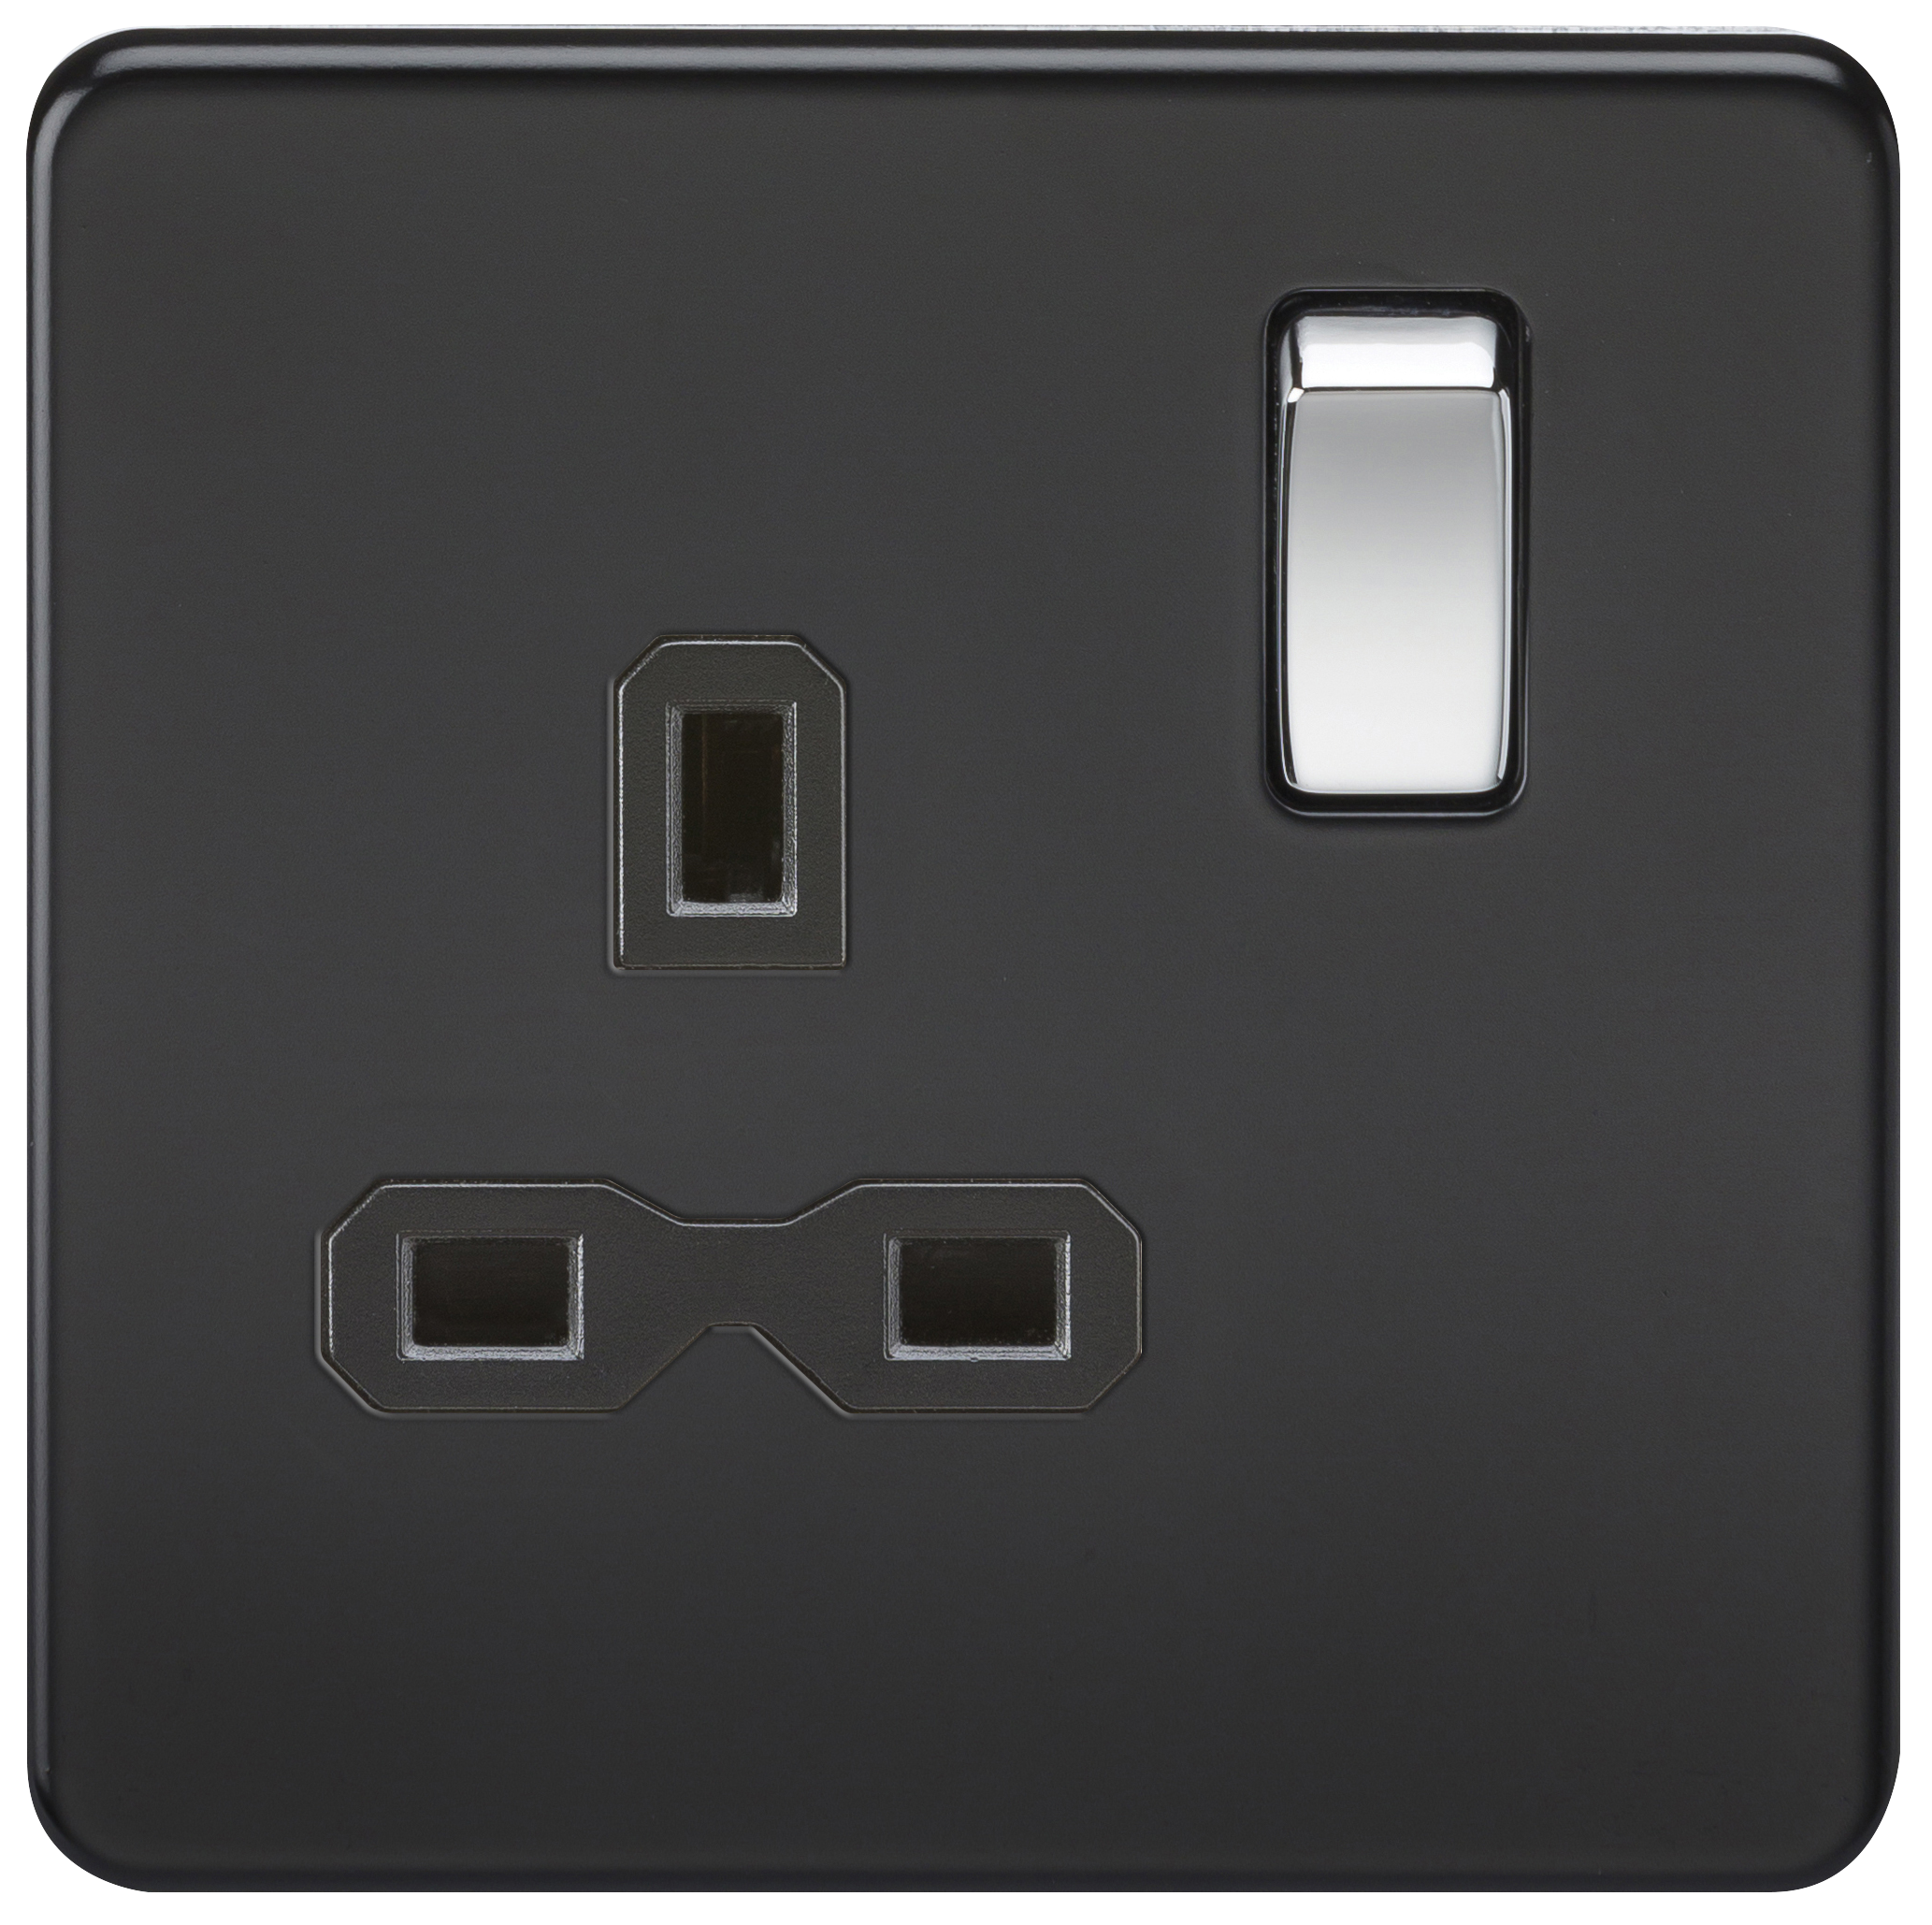 Screwless 13A 1G DP Switched Socket - Matt Black With Black Insert And Chrome Rockers - SFR7000MB 